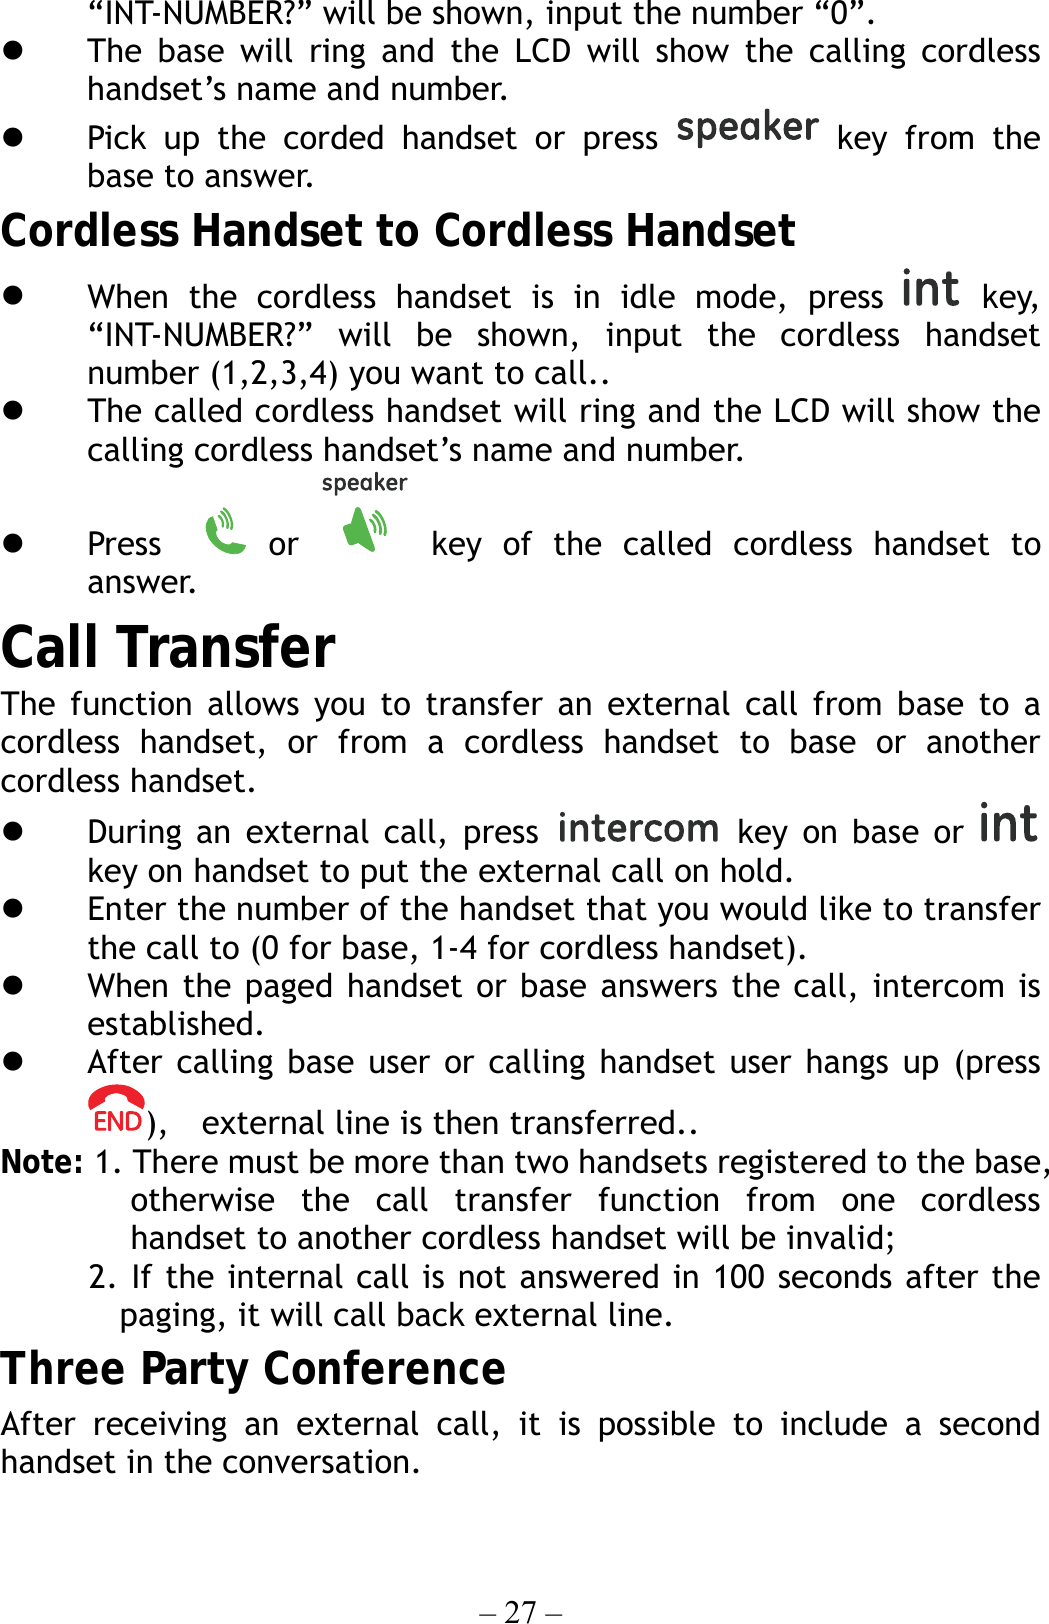 – 27 – “INT-NUMBER?” will be shown, input the number “0”.   The base will ring and the LCD will show the calling cordless handset’s name and number.   Pick up the corded handset or press   key from the base to answer. Cordless Handset to Cordless Handset   When the cordless handset is in idle mode, press   key, “INT-NUMBER?” will be shown, input the cordless handset number (1,2,3,4) you want to call..   The called cordless handset will ring and the LCD will show the calling cordless handset’s name and number.   Press    or   key of the called cordless handset to answer. Call Transfer The function allows you to transfer an external call from base to a cordless handset, or from a cordless handset to base or another cordless handset.   During an external call, press  key on base or   key on handset to put the external call on hold.   Enter the number of the handset that you would like to transfer the call to (0 for base, 1-4 for cordless handset).     When the paged handset or base answers the call, intercom is established.   After calling base user or calling handset user hangs up (press ),    external line is then transferred.. Note: 1. There must be more than two handsets registered to the base, otherwise the call transfer function from one cordless handset to another cordless handset will be invalid;   2. If the internal call is not answered in 100 seconds after the  paging, it will call back external line. Three Party Conference After receiving an external call, it is possible to include a second handset in the conversation. 